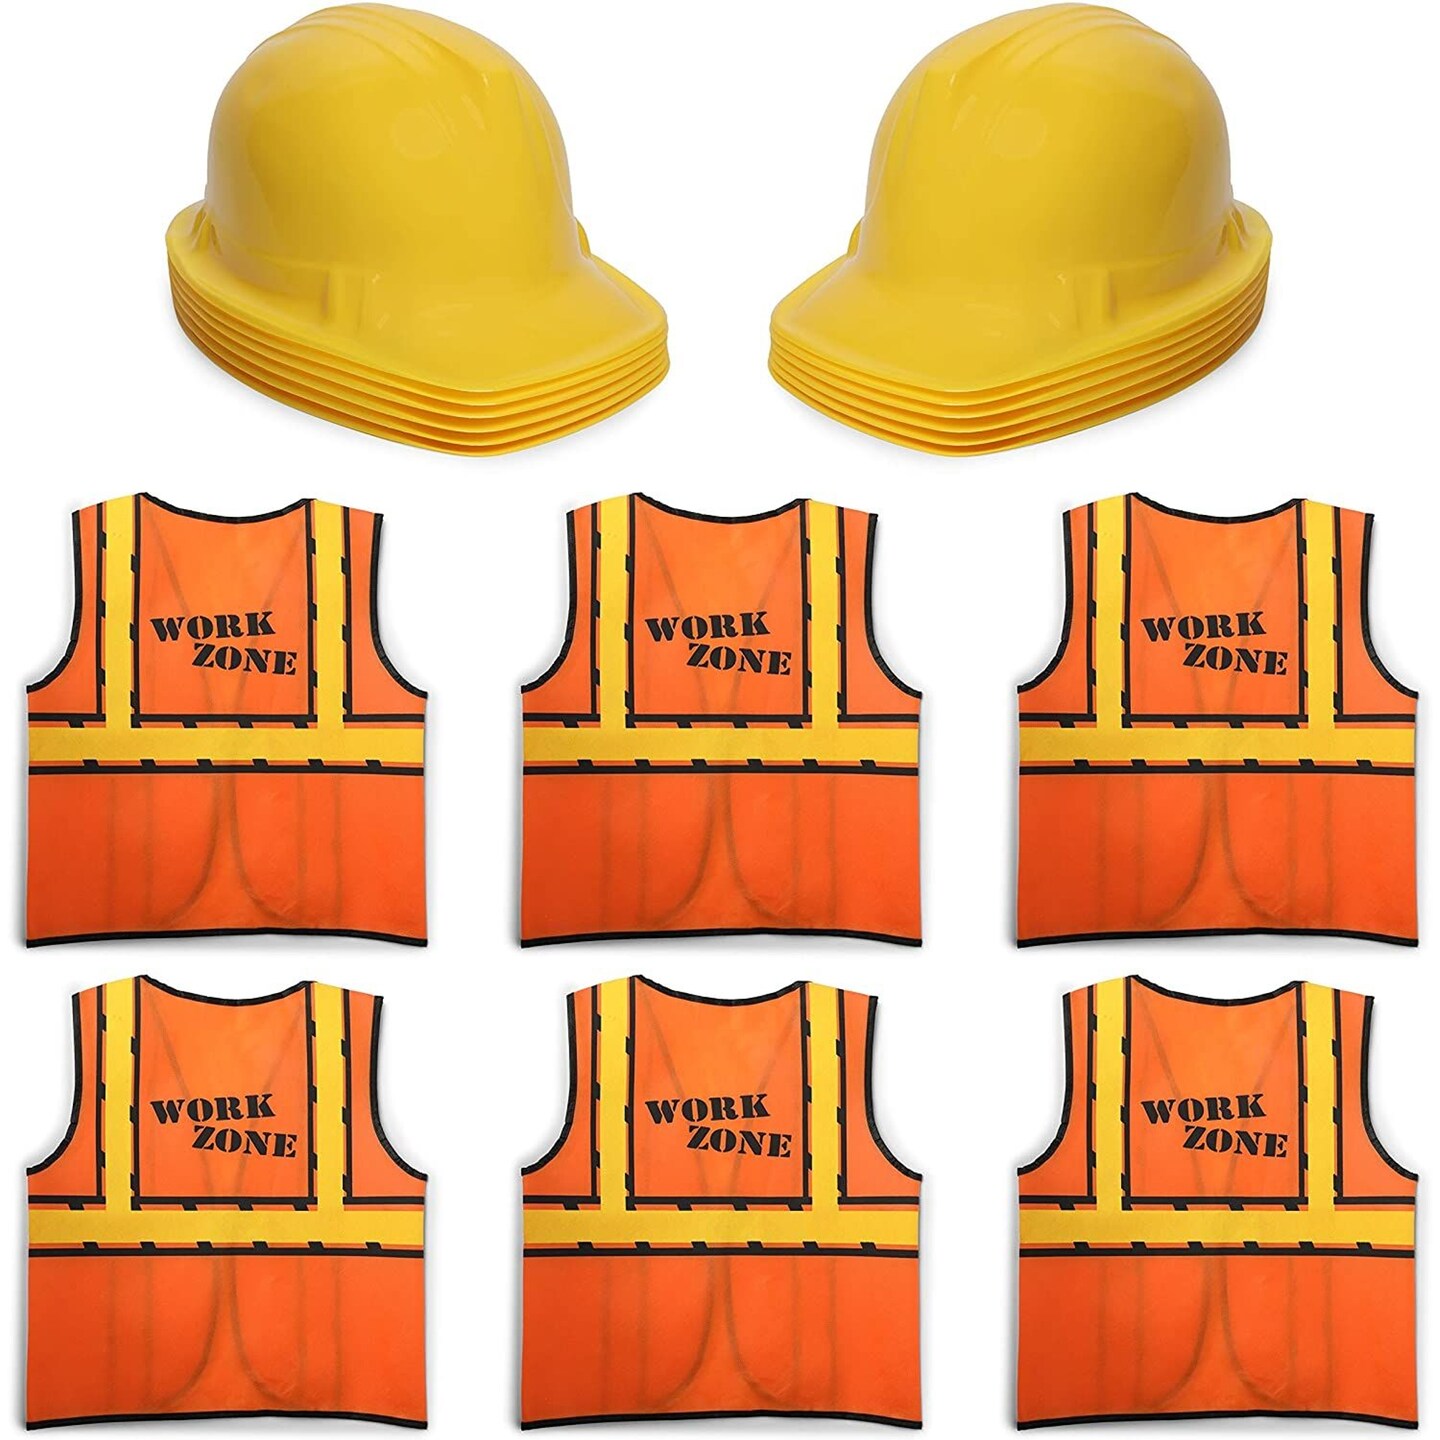 6 Set Construction Worker Costumes for Kids - Vests and Hats for Construction Theme Birthday Dress-Up Party